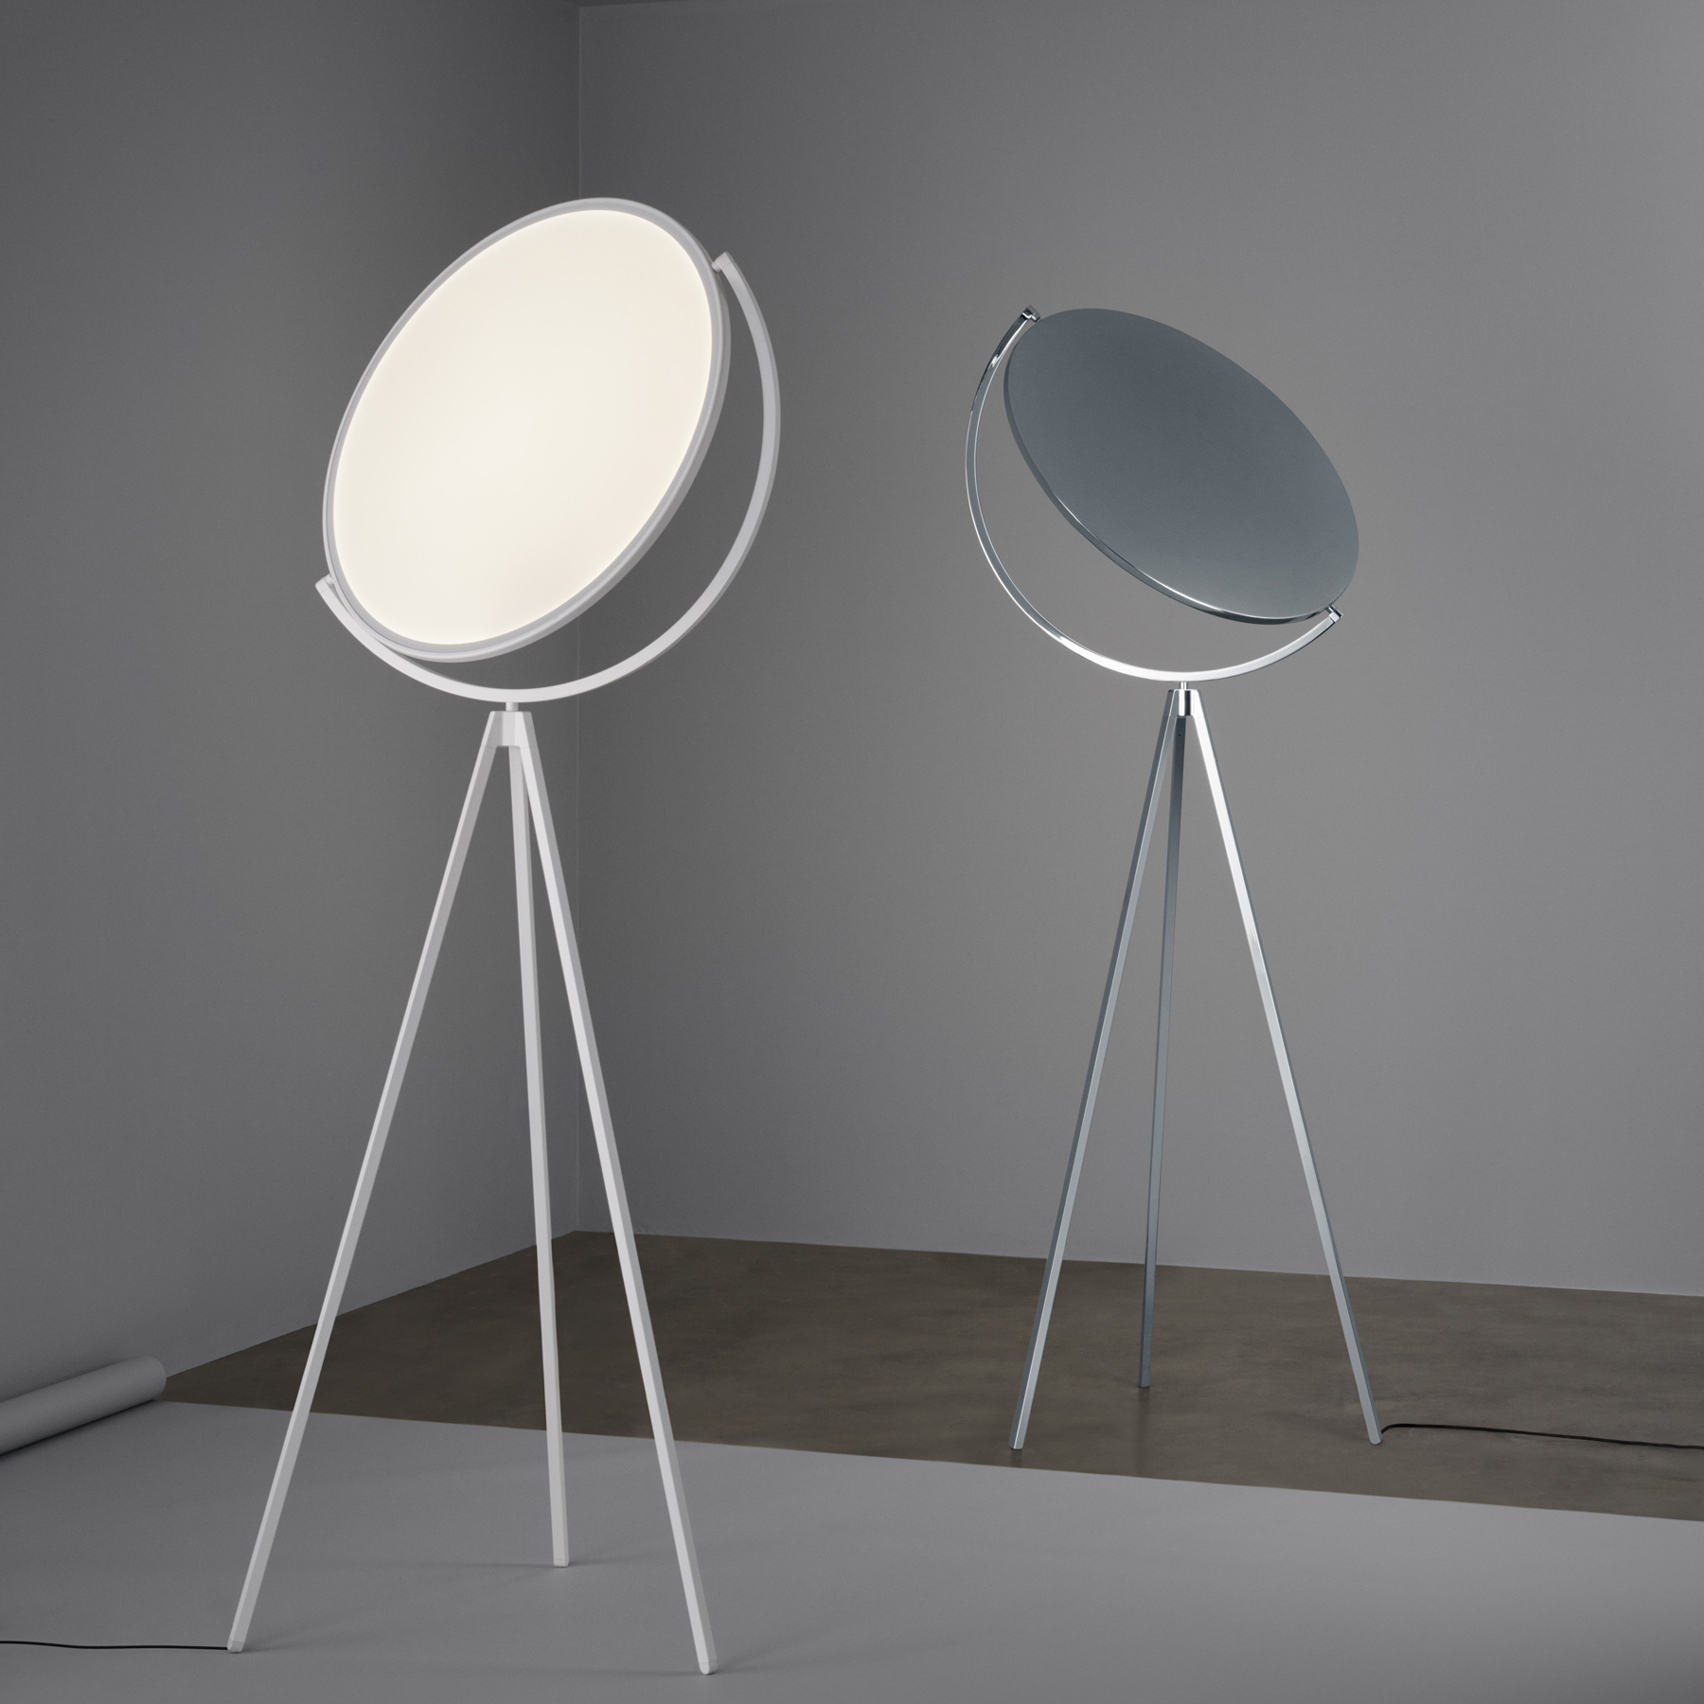 Superloon by Jasper Morrison is one of James Mair's top five minimalist furniture choices